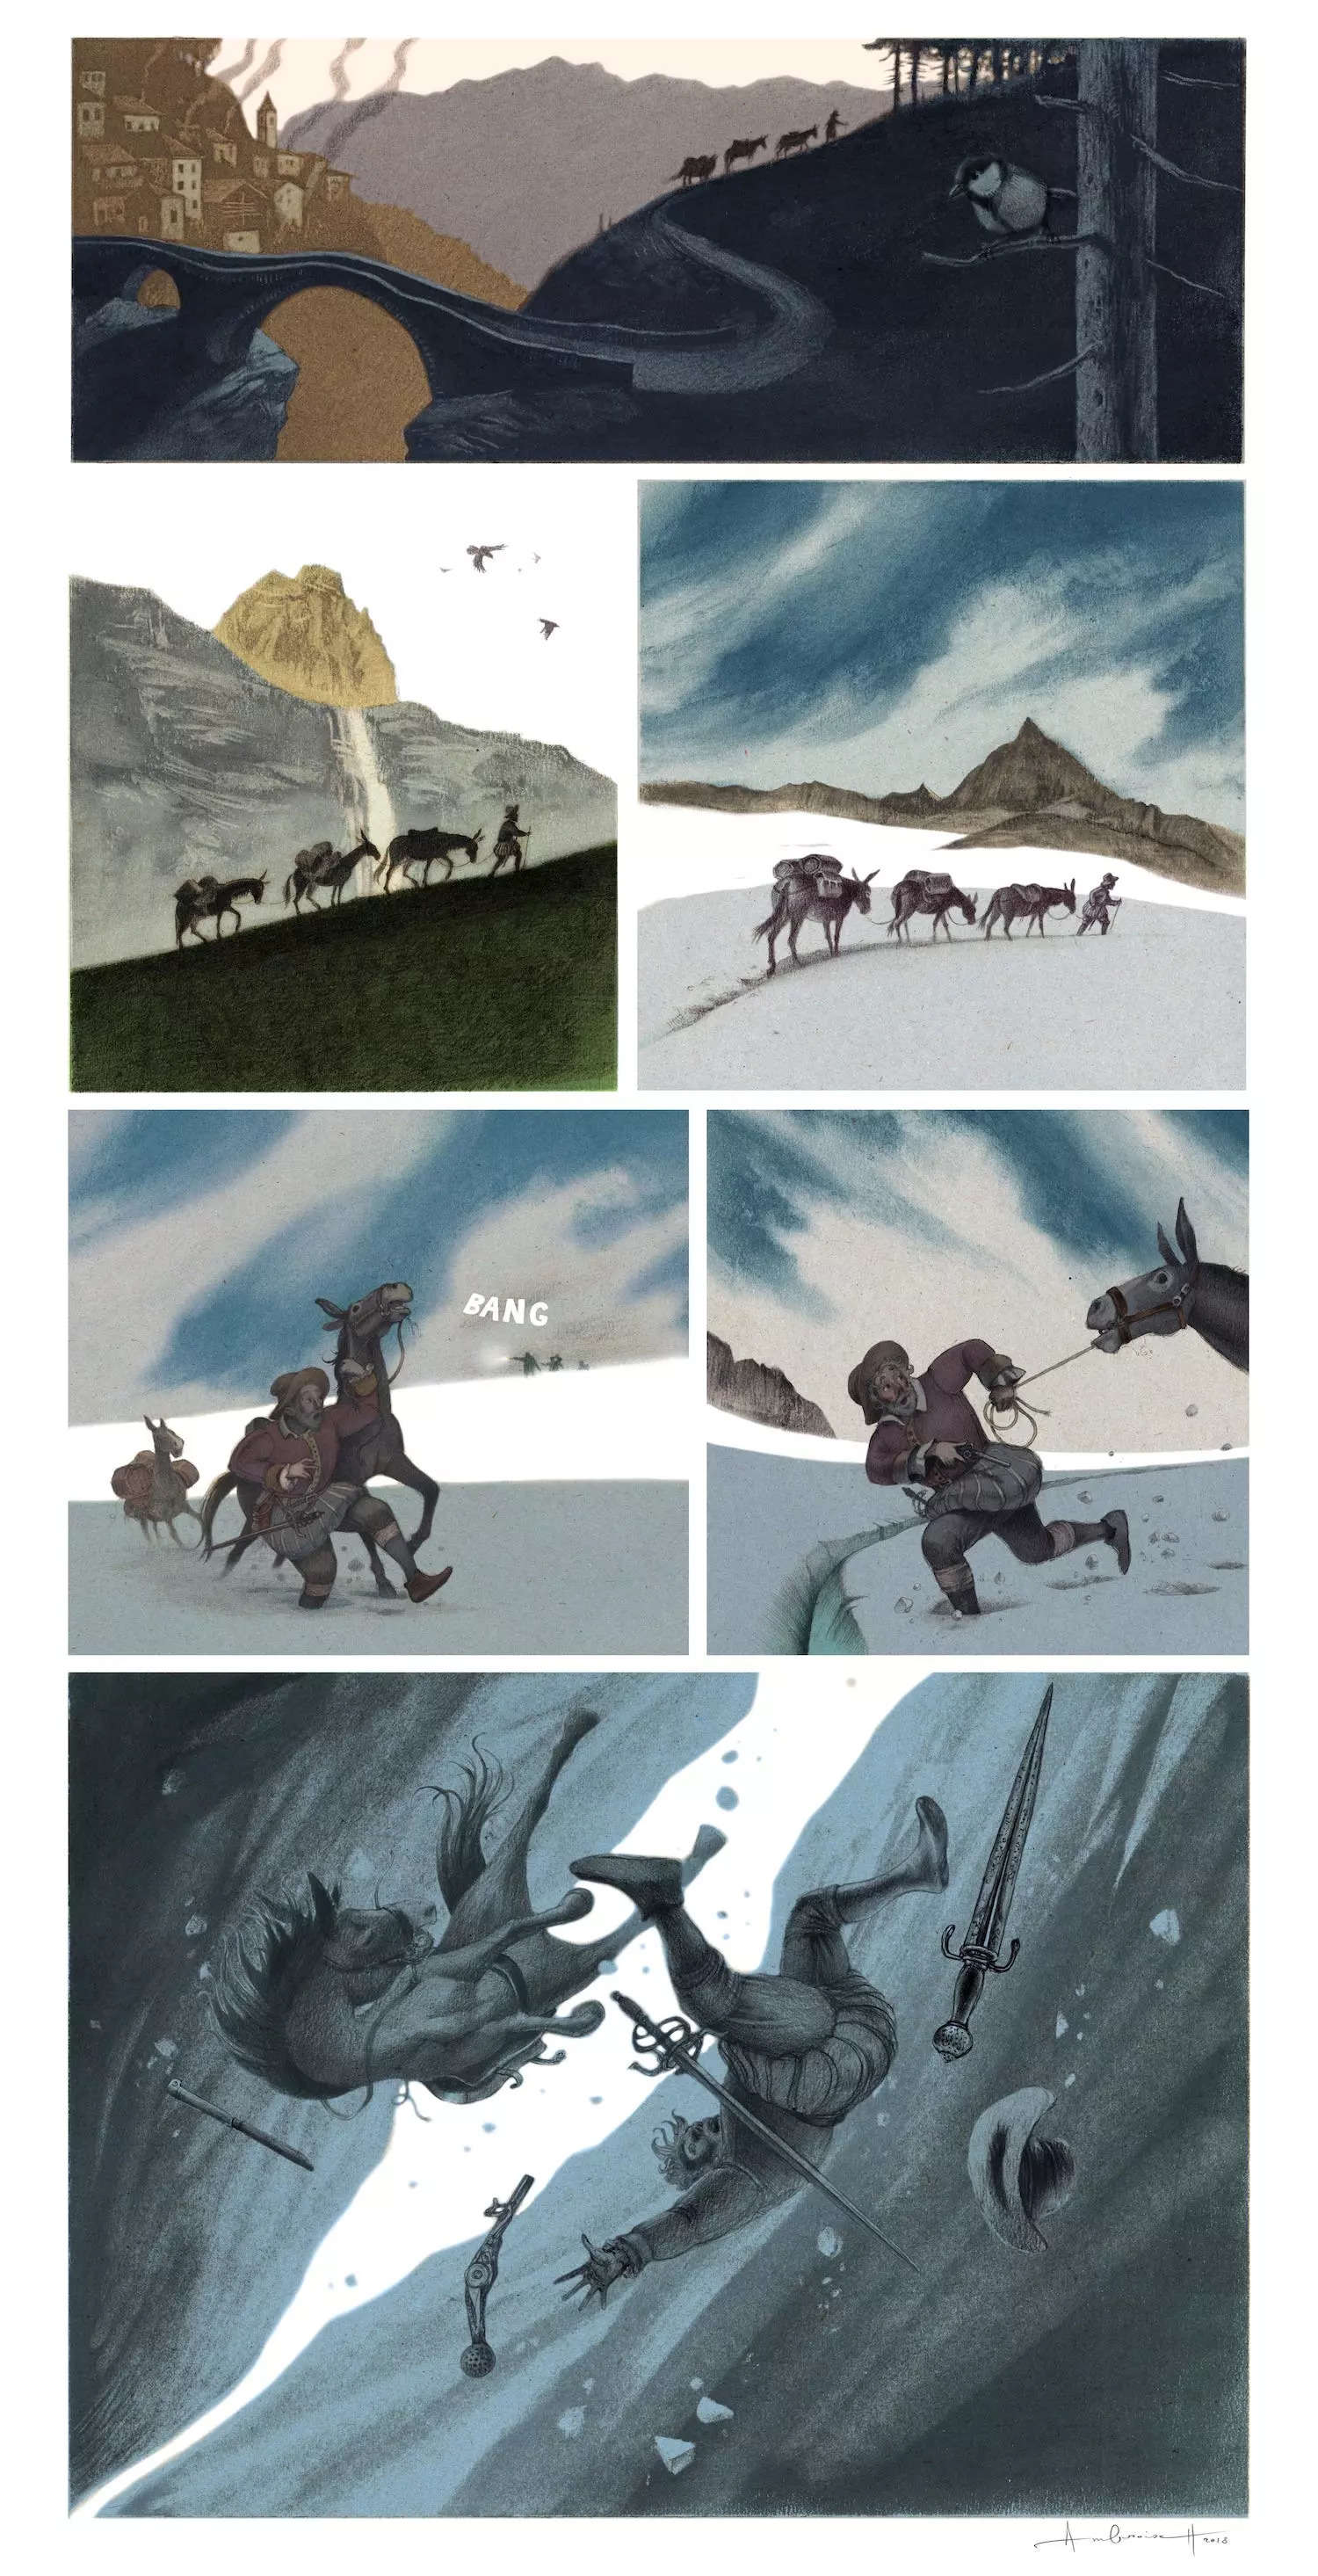 illustrated comic strip showing a man in medieval garb walking with a line of three mules out of a town, up a mountain, and onto a glacier, then falling into a giant crevasse, in six panels